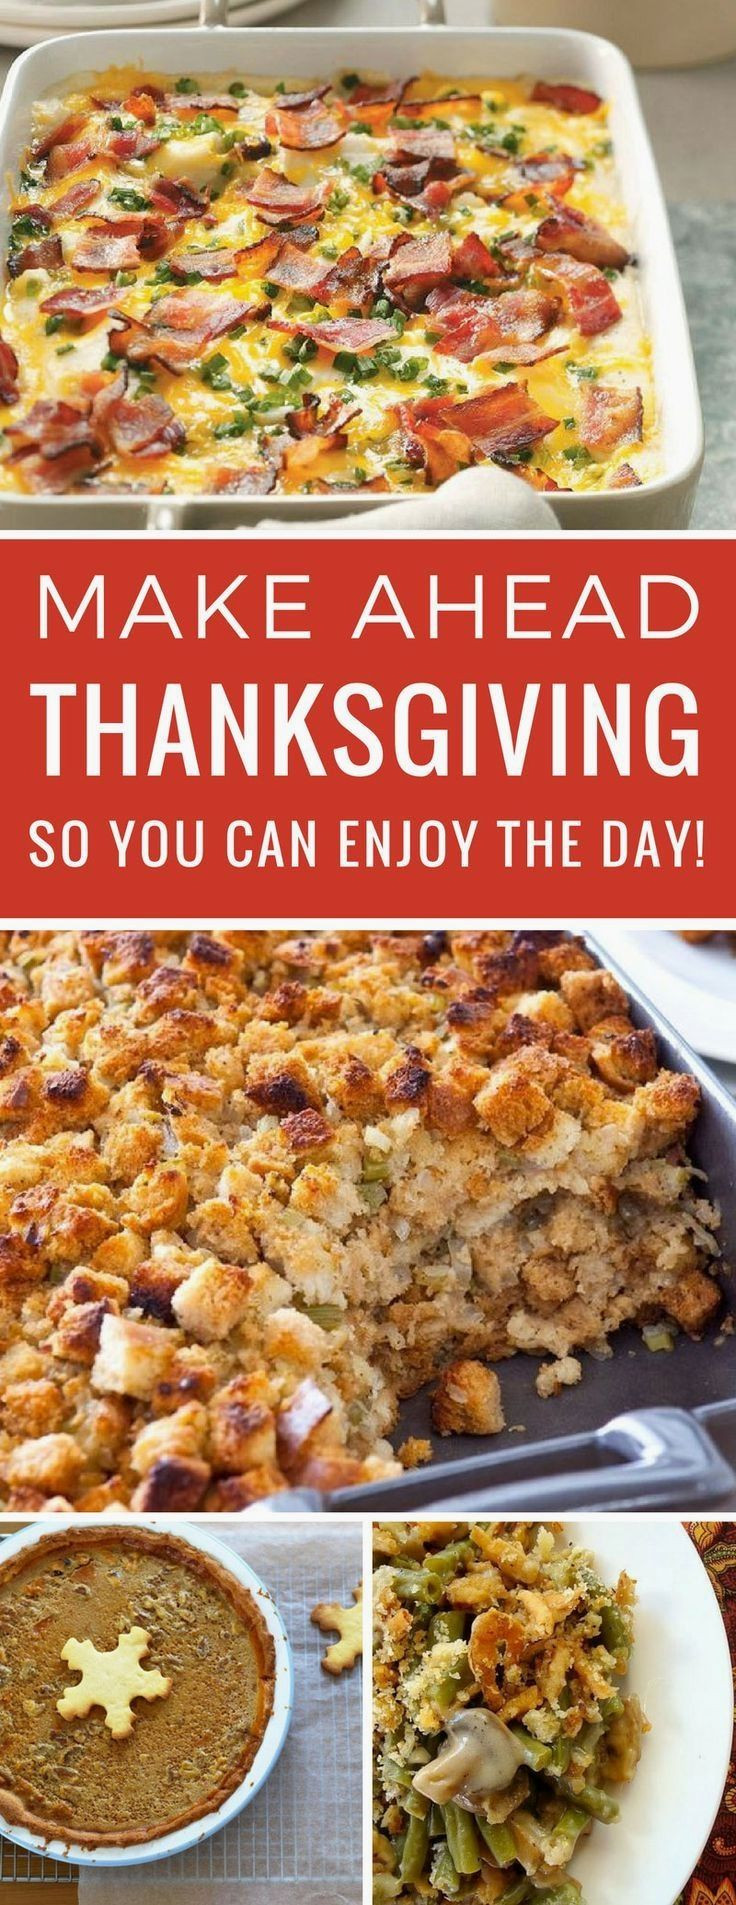 Thanksgiving Side Dishes 2019
 Pin by Sandy Rudloff on Thanksgiving in 2019